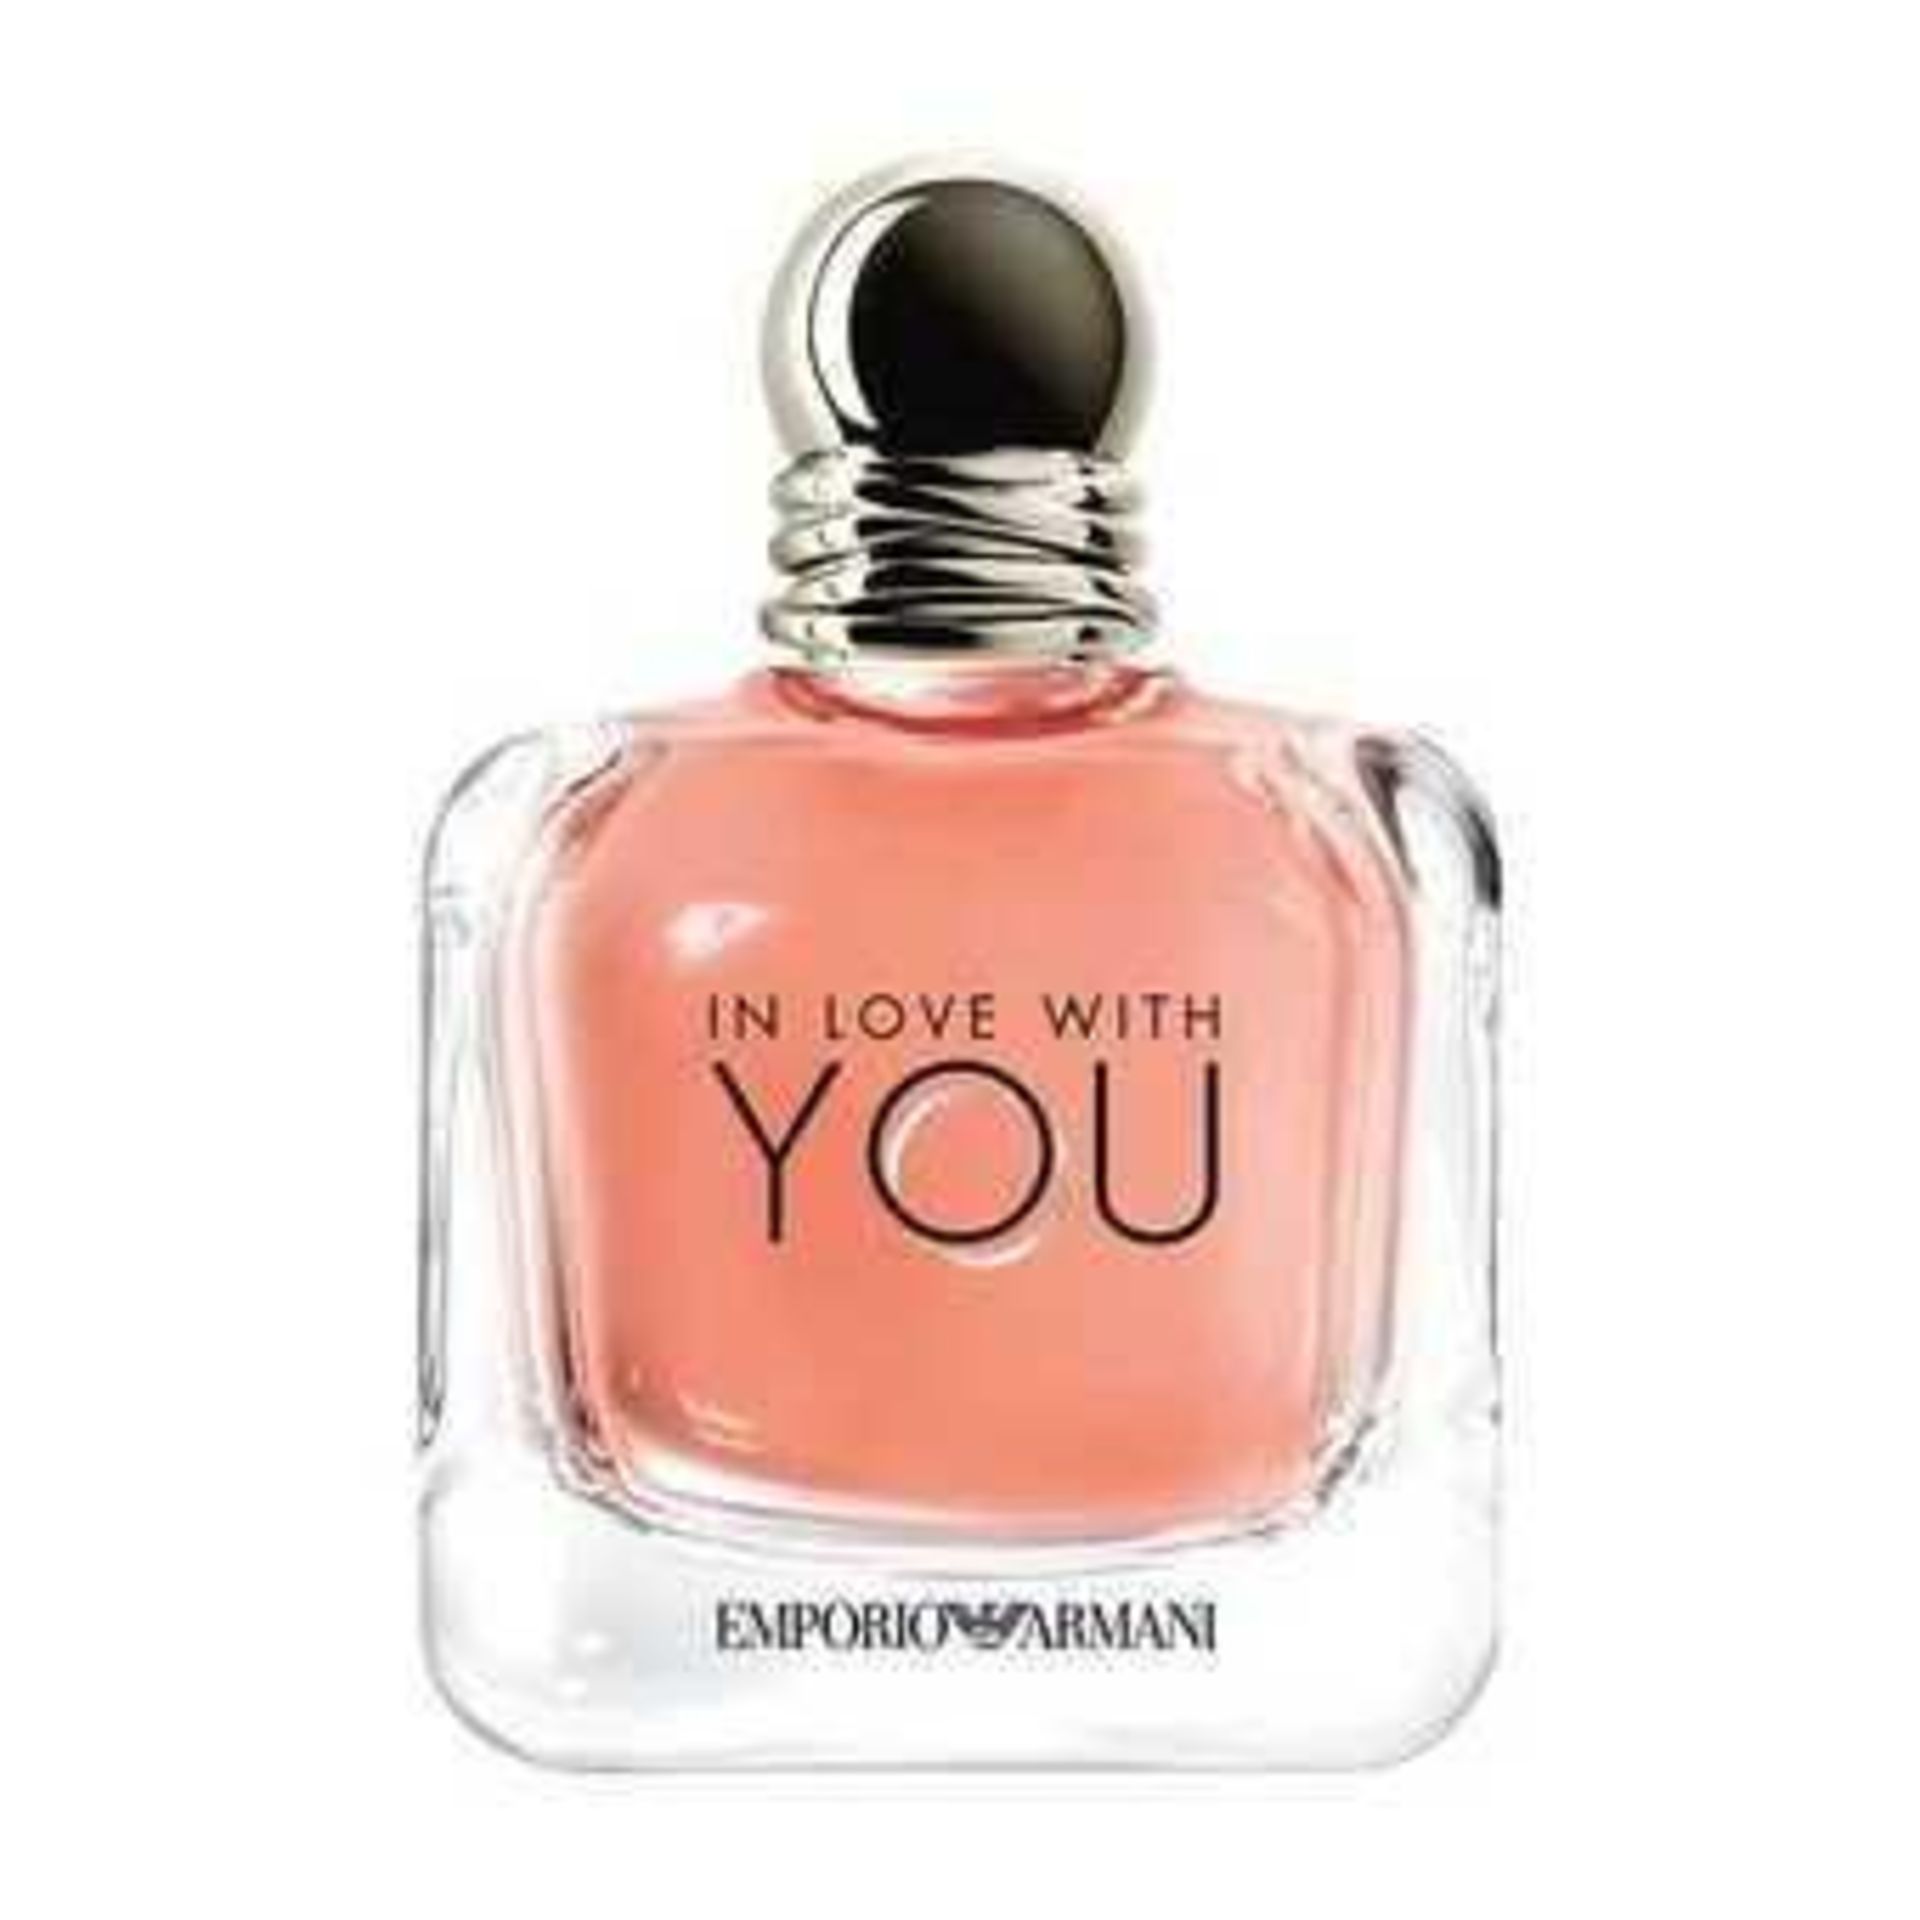 RRP £95 Unboxed Unused Ex-Display Tester Bottle Of Emporio Armani In Love With You Eau De Parfum Spr